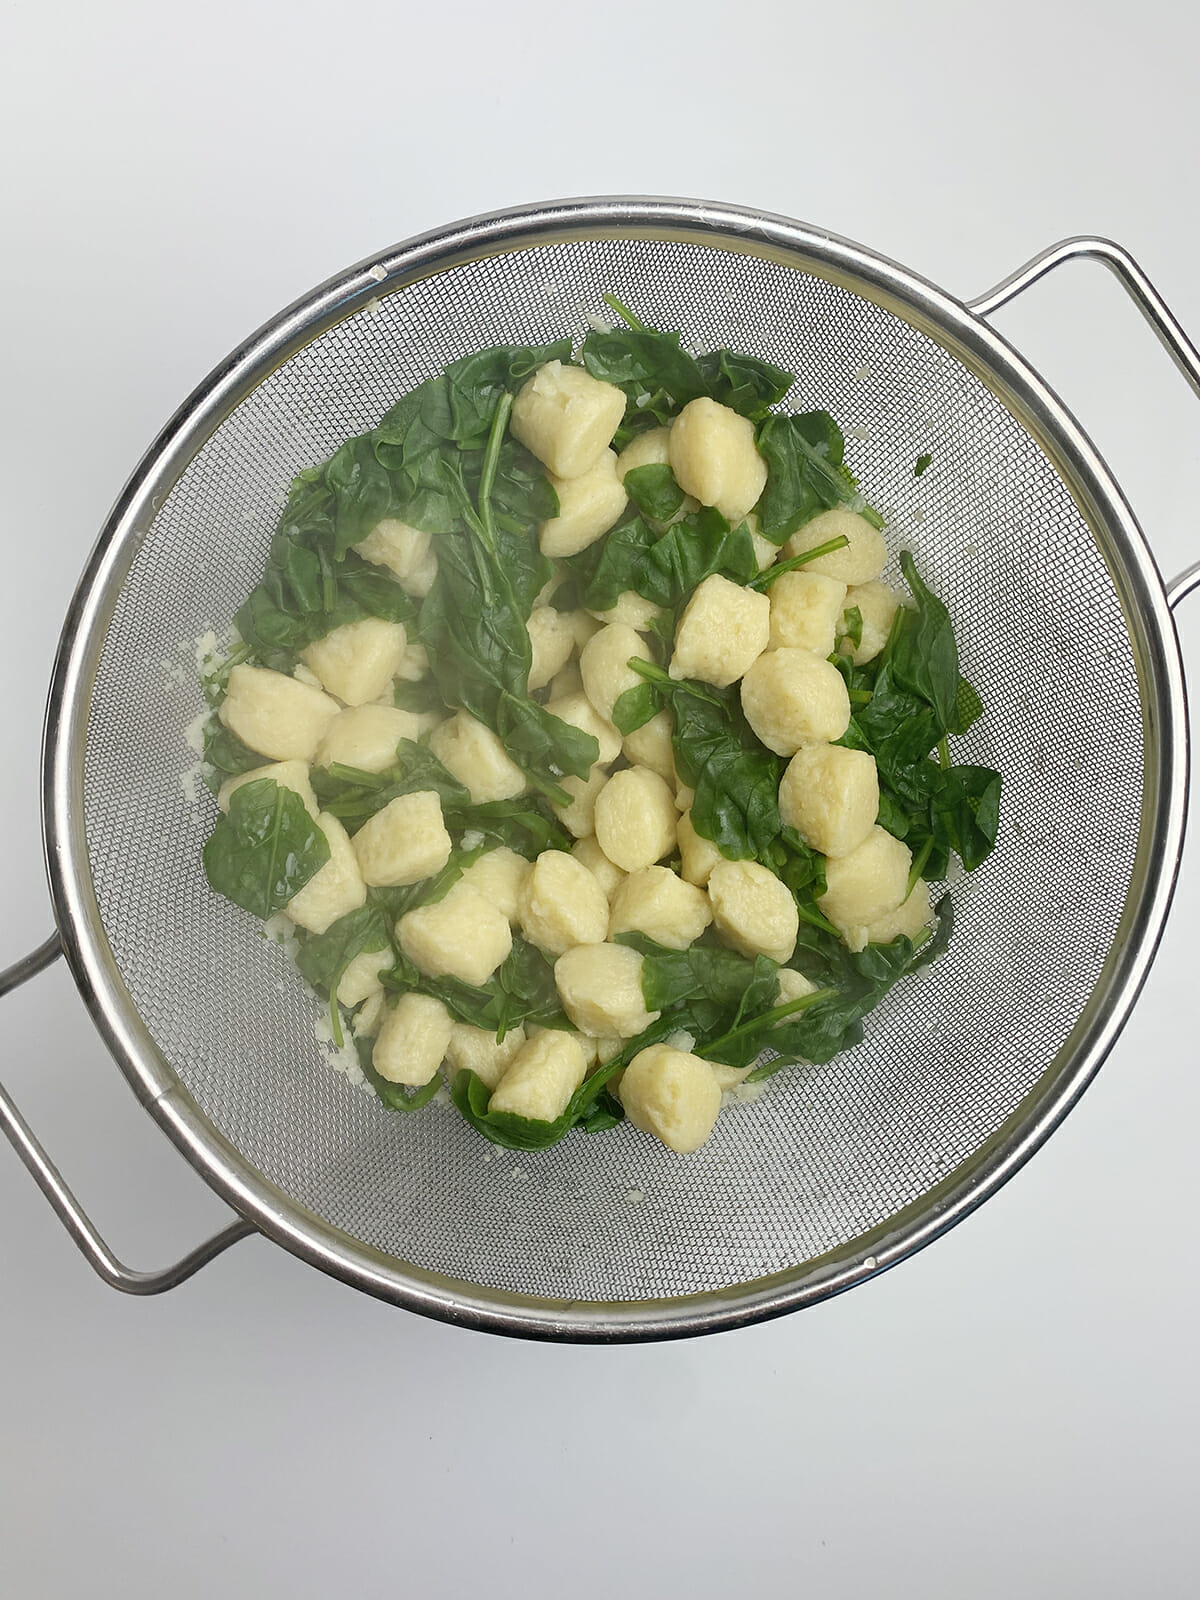 Gnocchi and spinach draining in strainer.